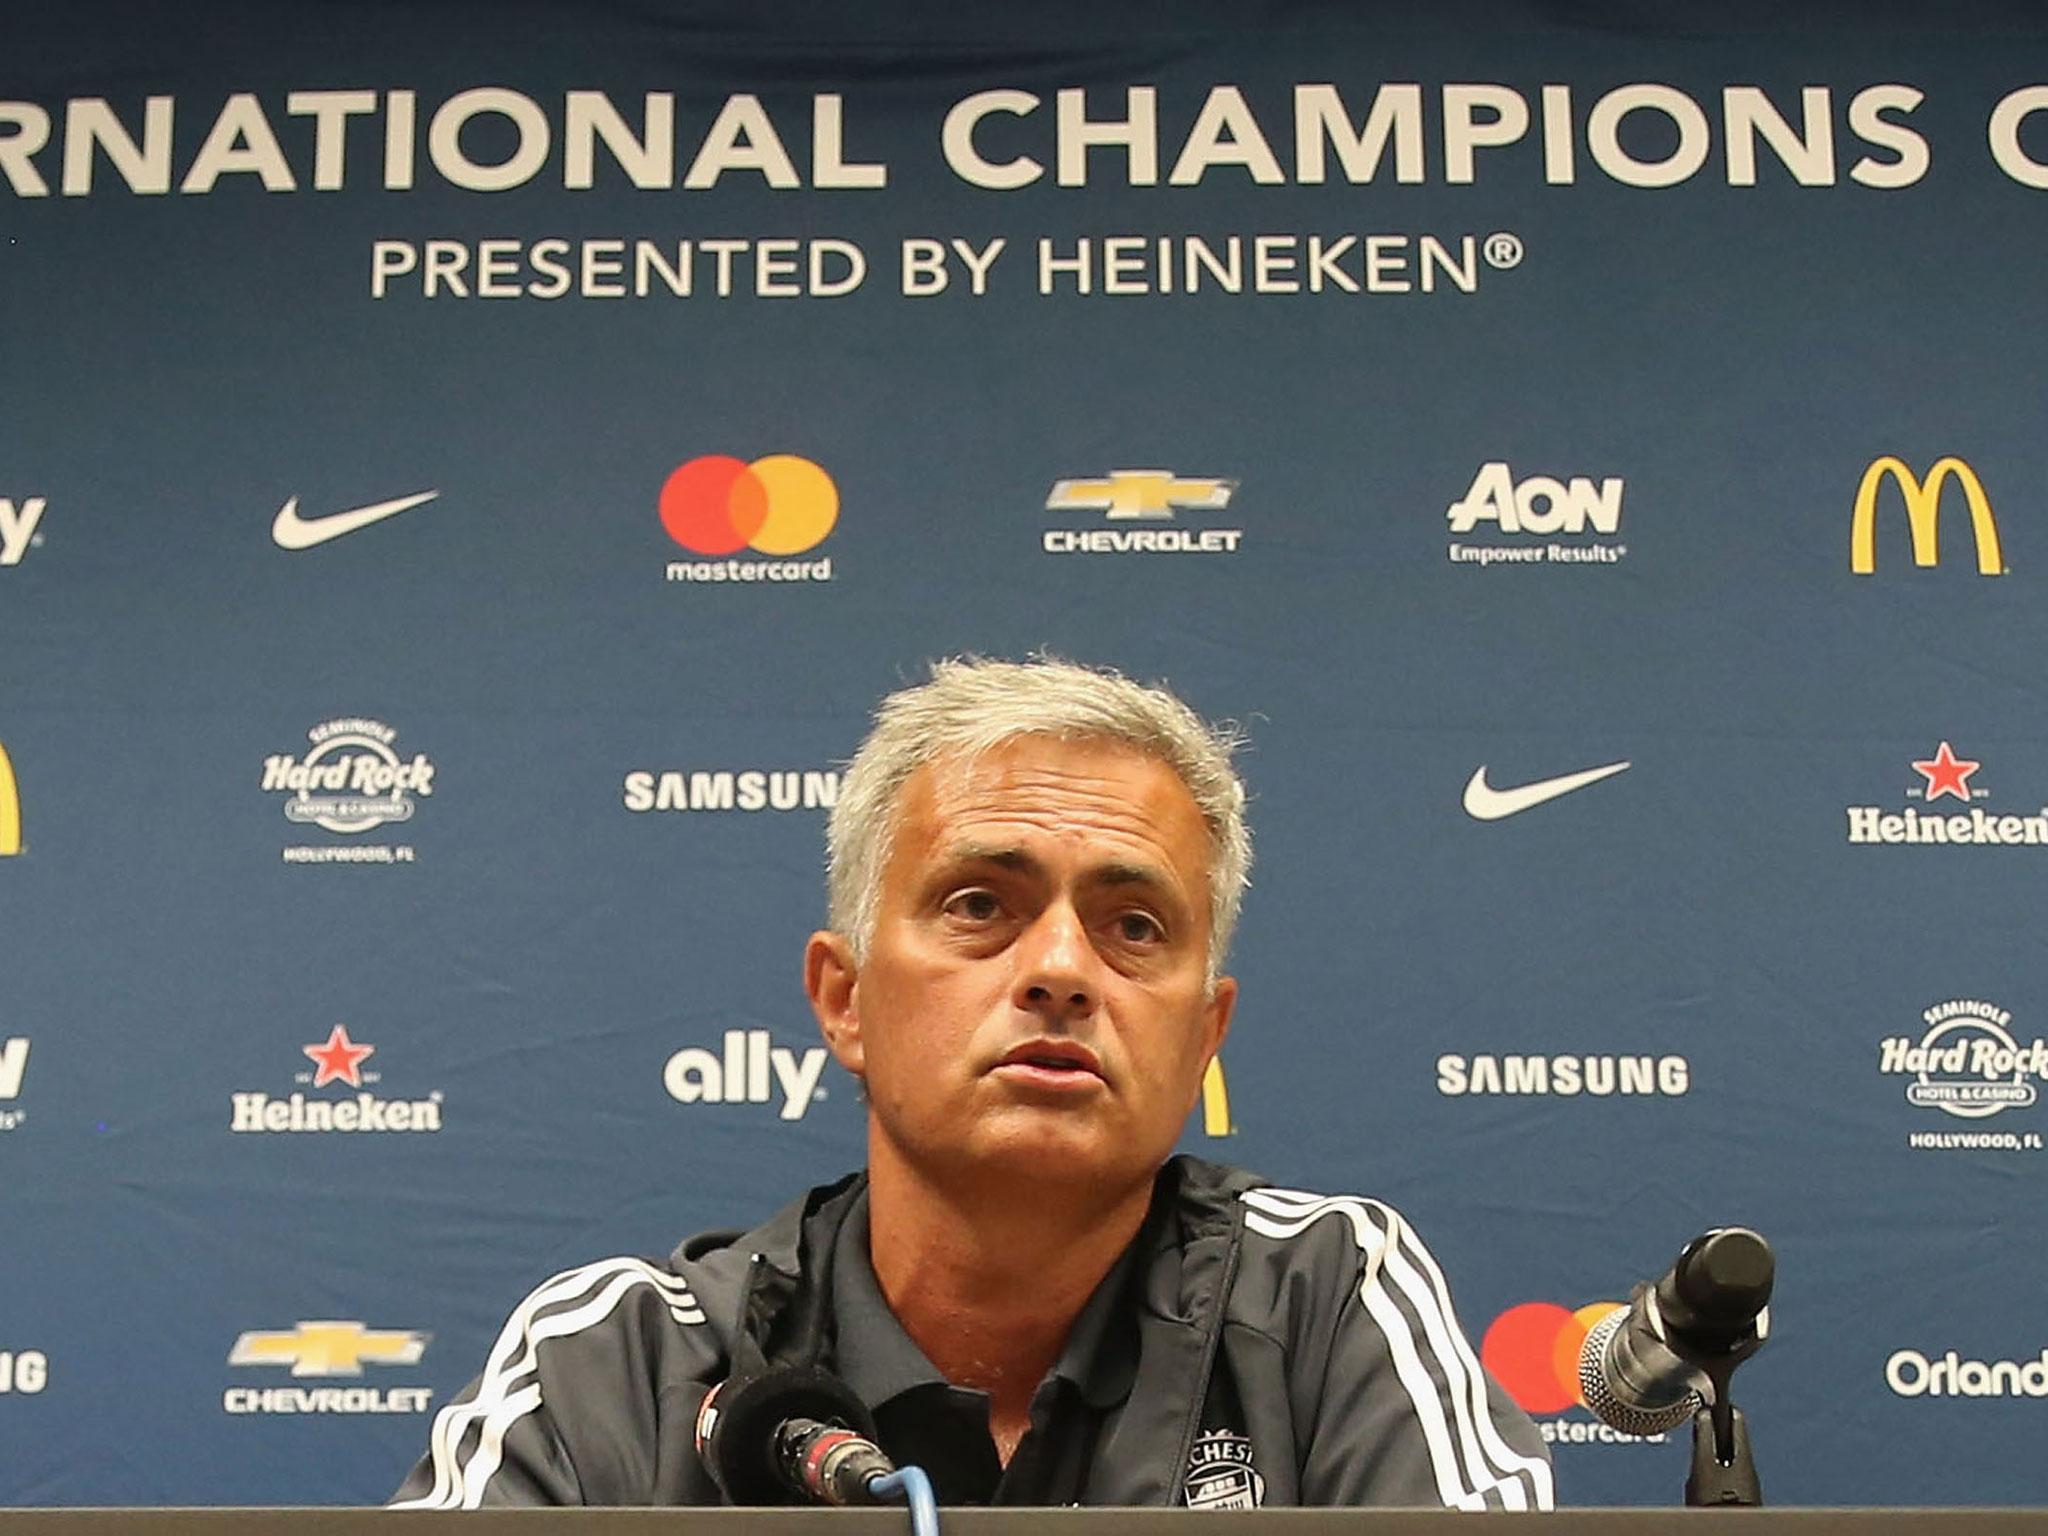 Jose Mourinho has downplayed the friendly against City